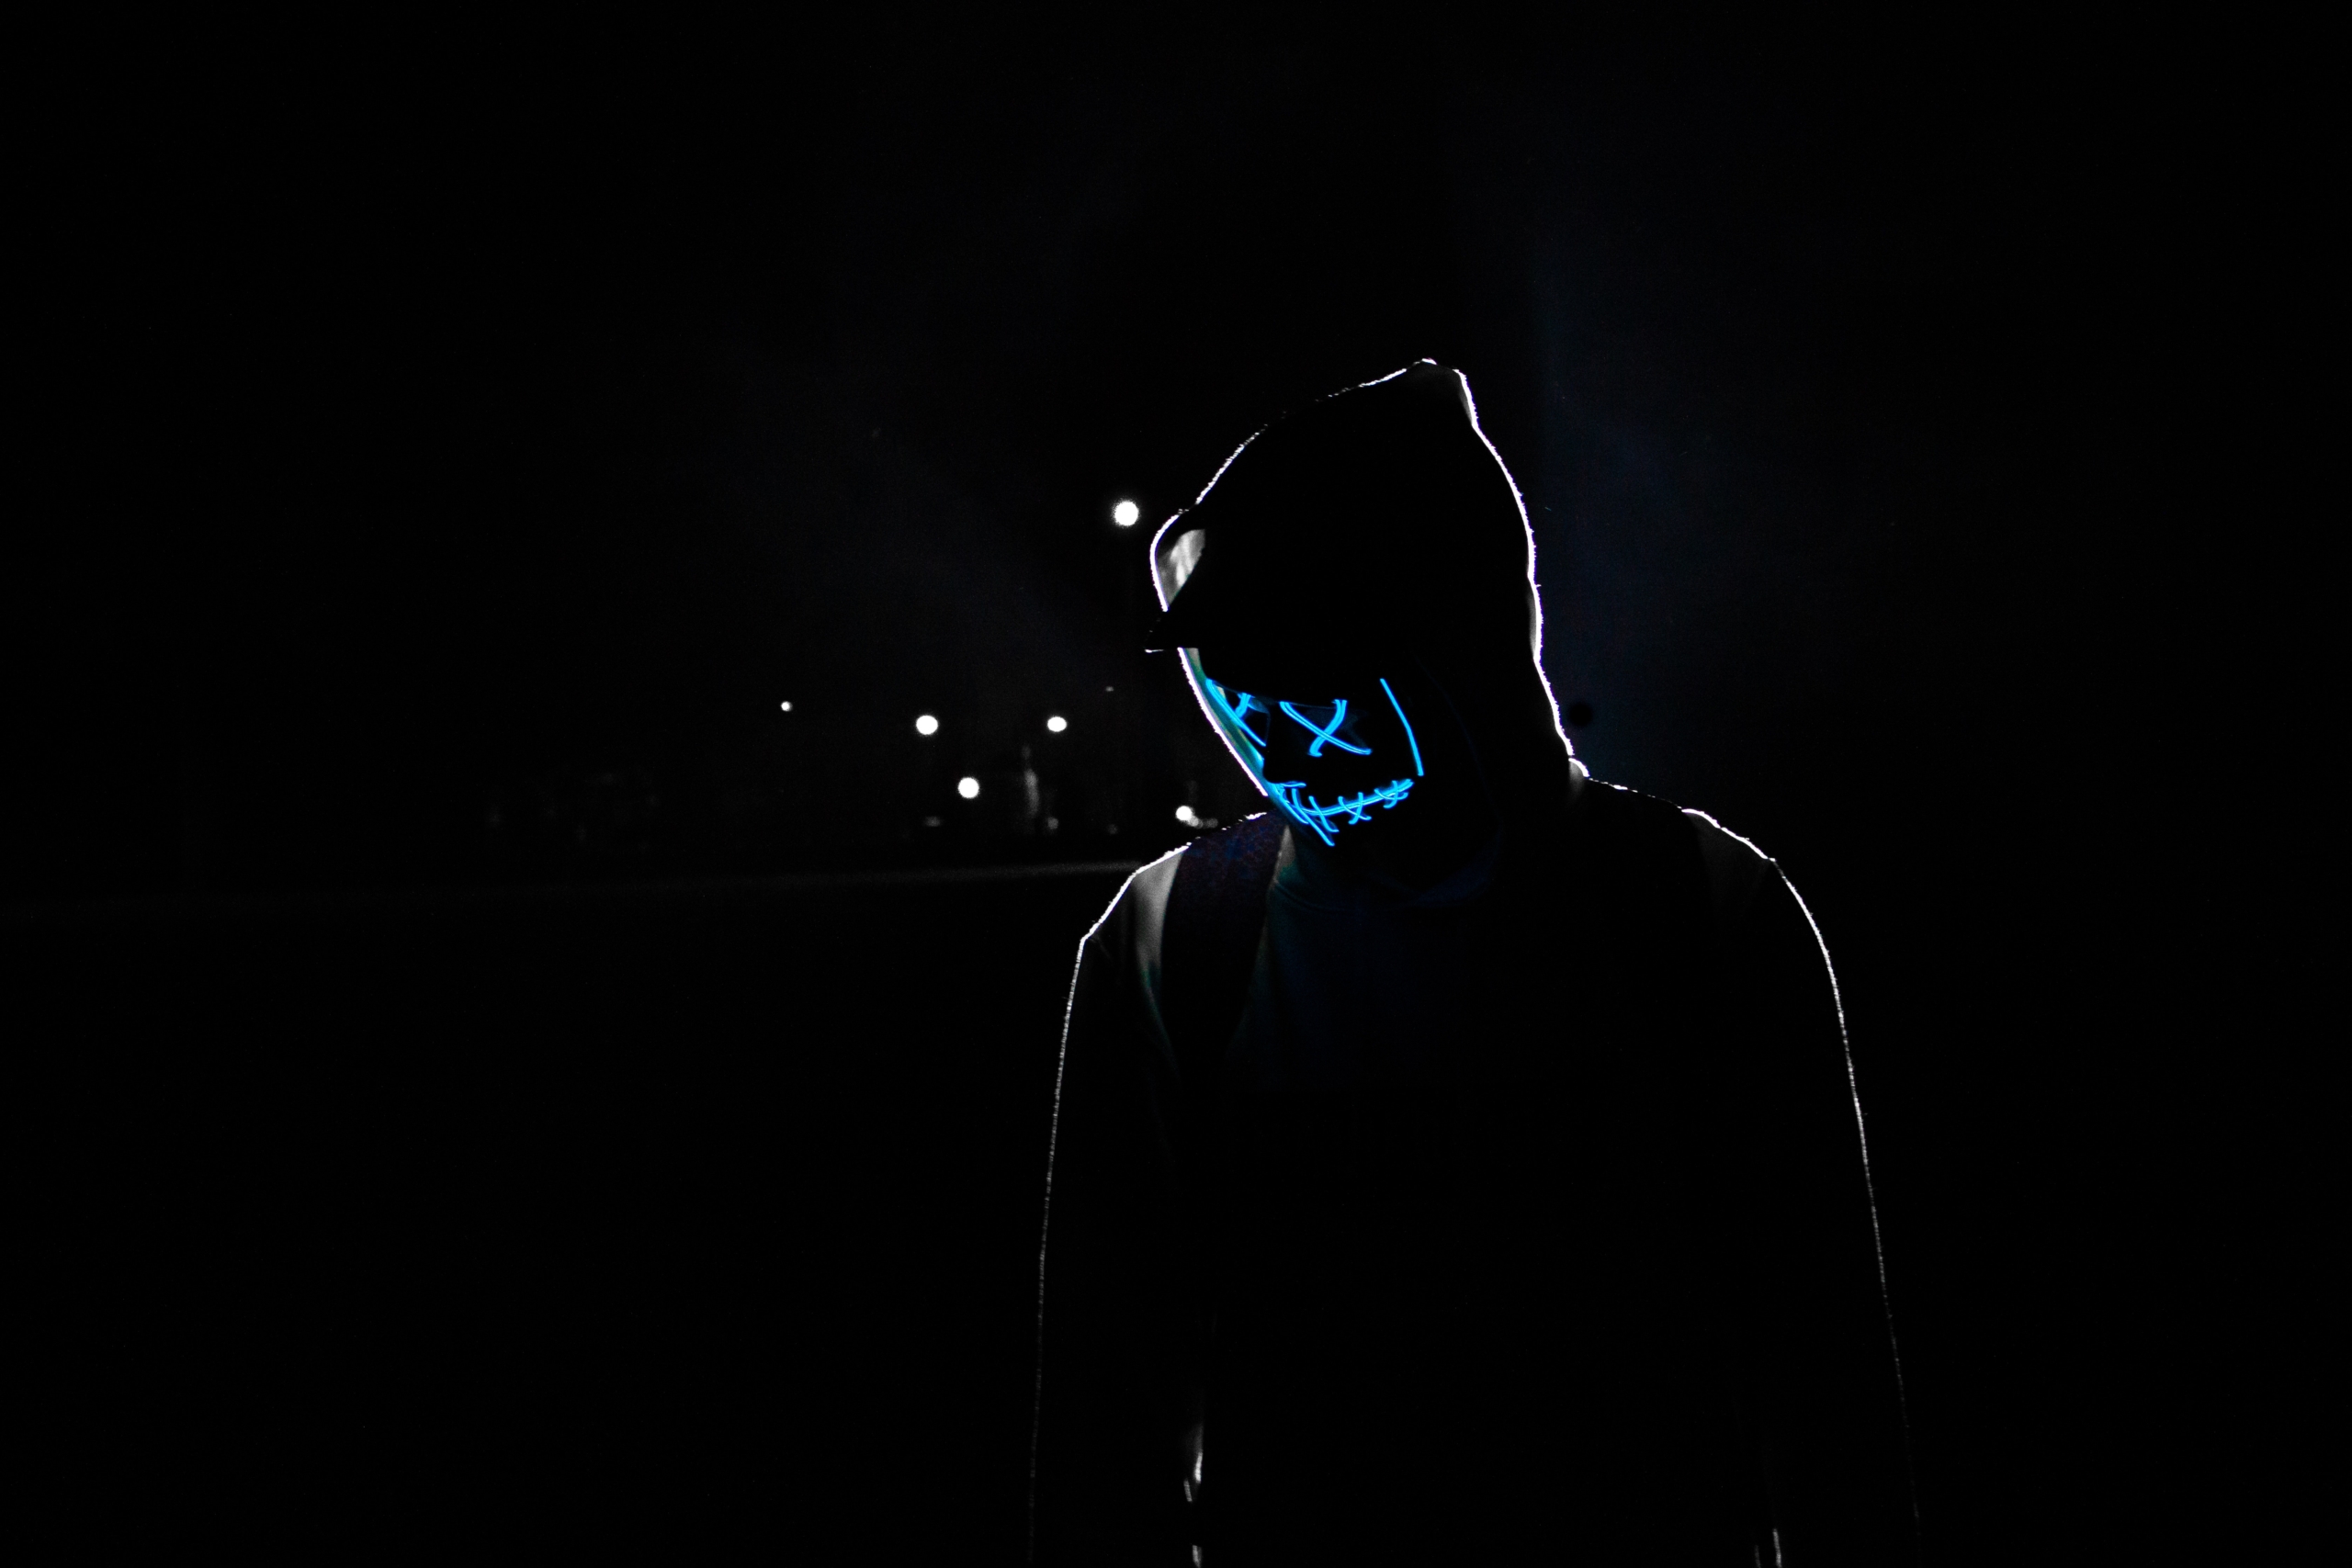 Person with neon mask resembling a stylized hacker at night